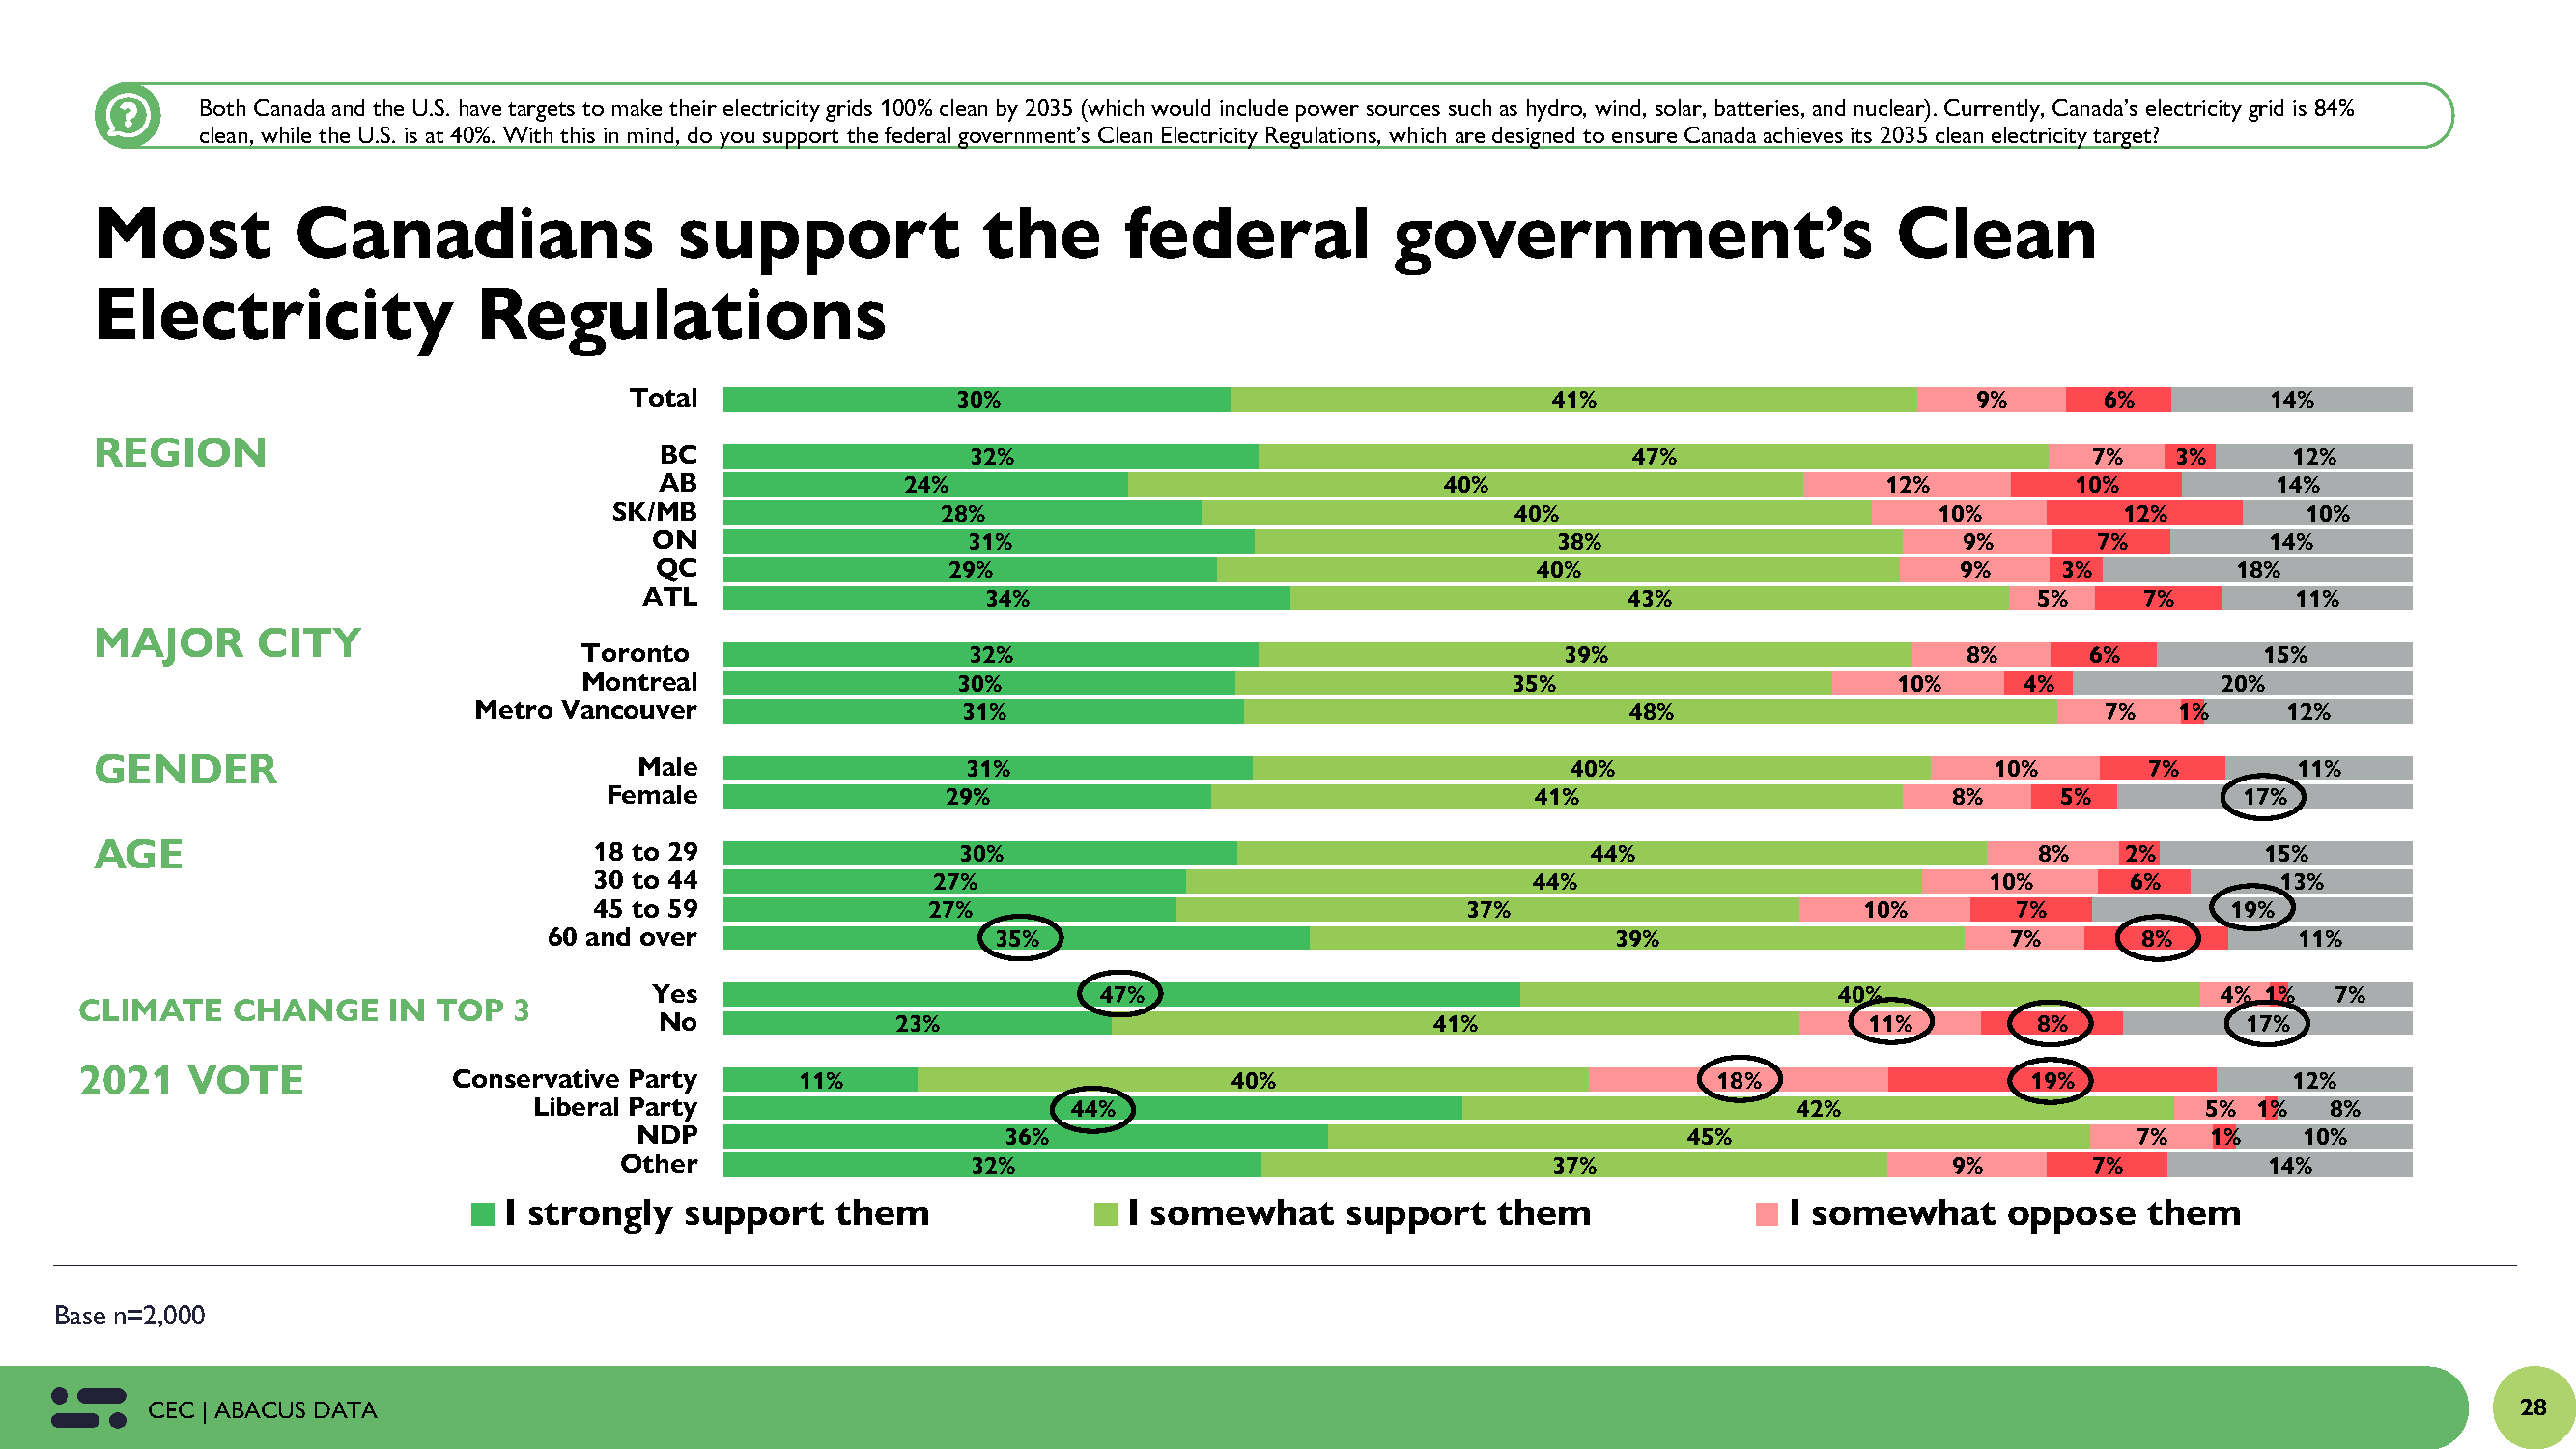 a series of bar graphs showing the proportion of each level of support for the government's clean electricity regulations, disaggregated by: region (region, major city), demographics (gender, age), attitude (whether climate change is in their top three concerns), and political views (2021 federal vote). Those who voted Liberal Party, aged 65 and over, and had climate change in their top three concerns were the most likely to show strong support.